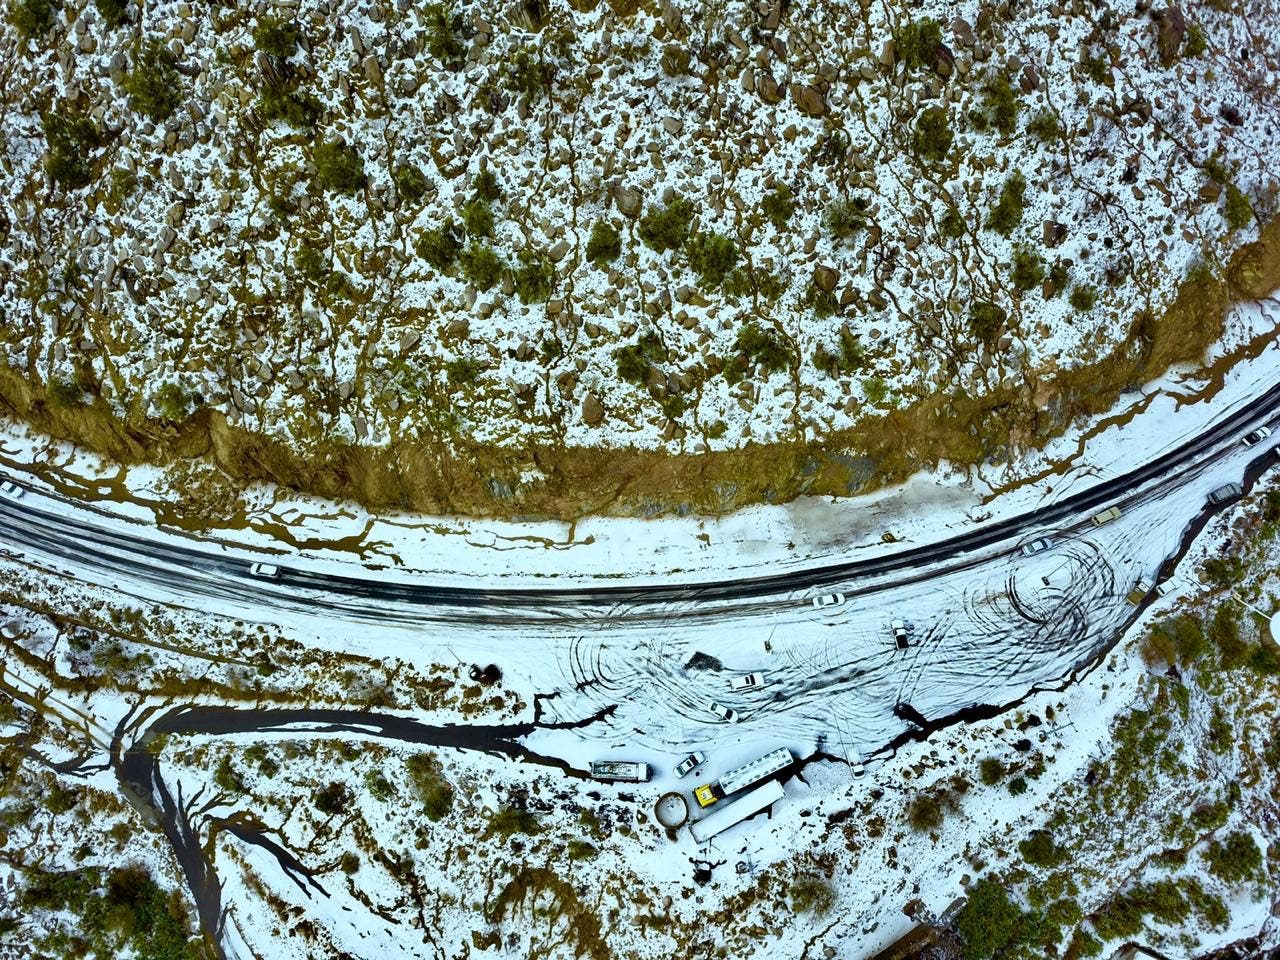 Snow in Maysan governorate, Mecca. (Supplied)